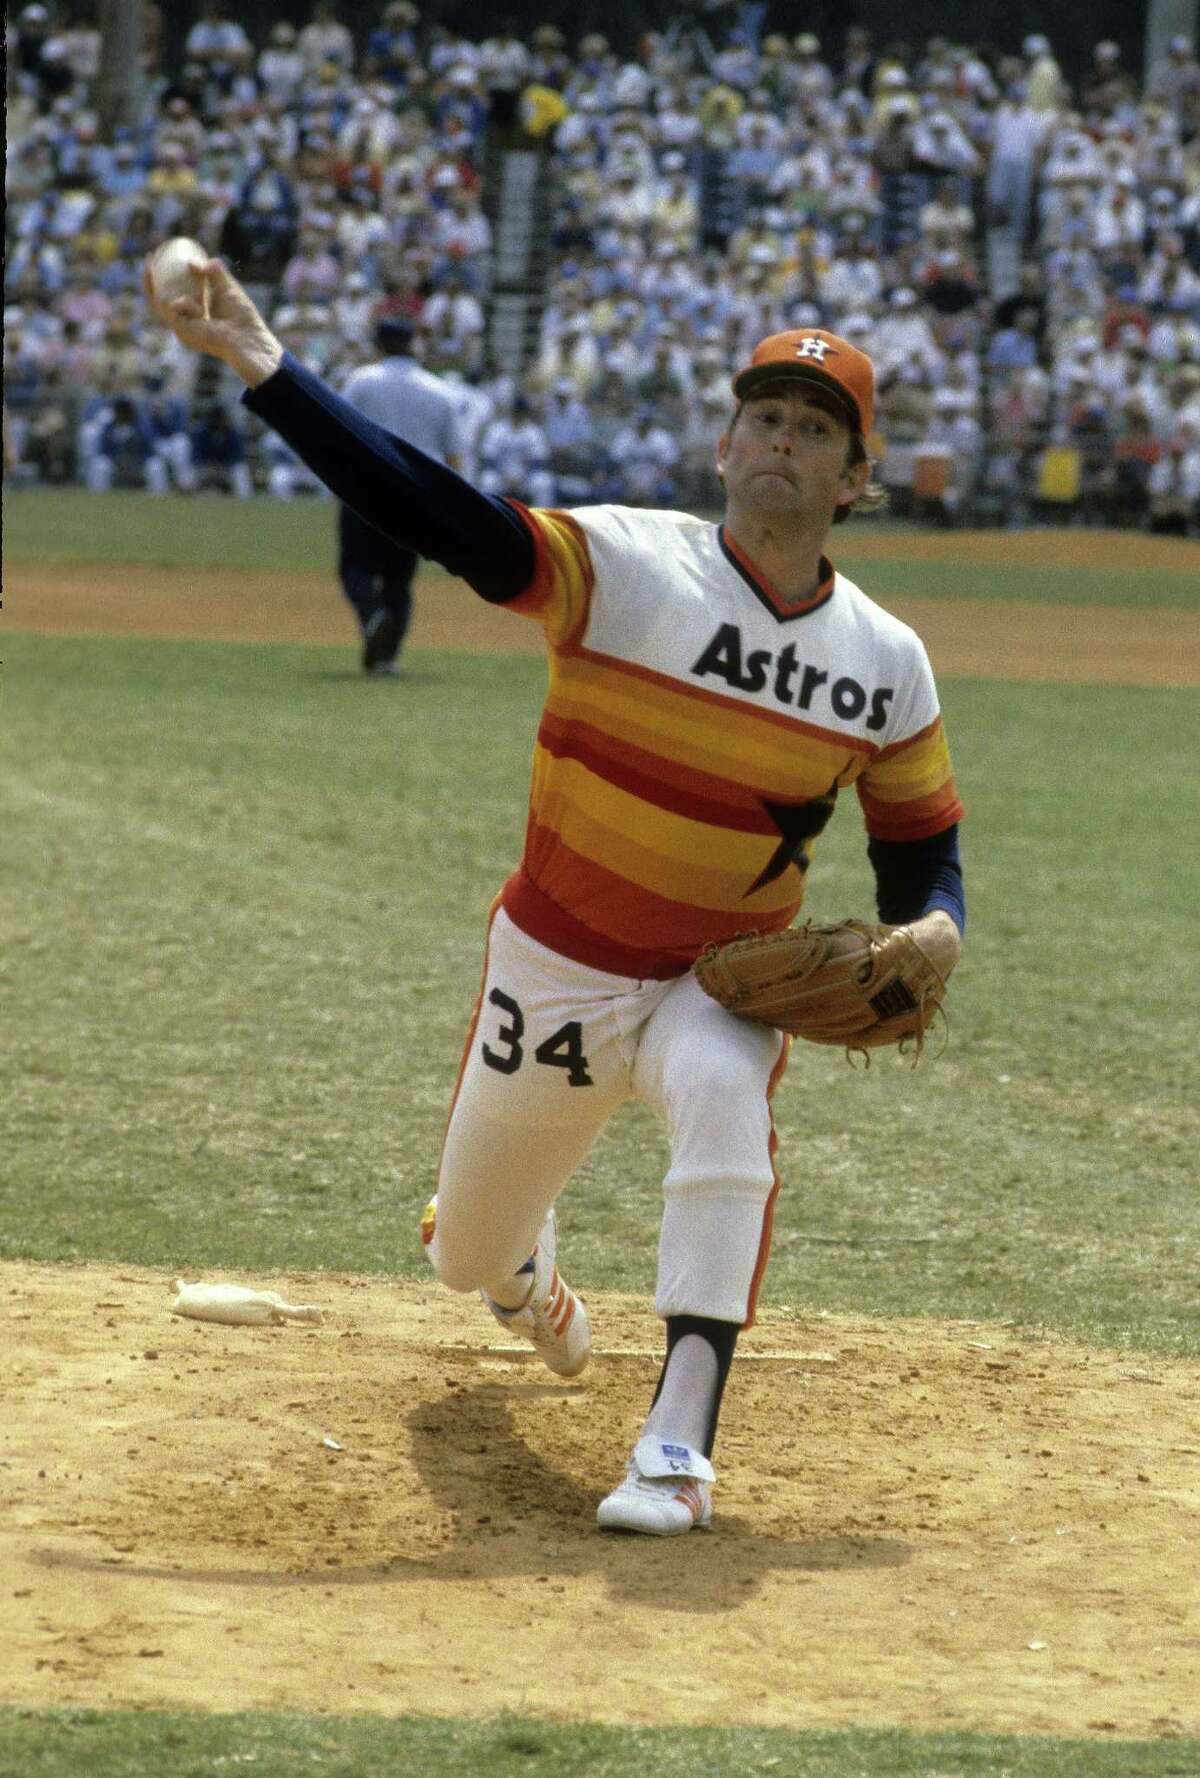 Astros New Uniforms To Bring Back Old Colors - RealGM Wiretap